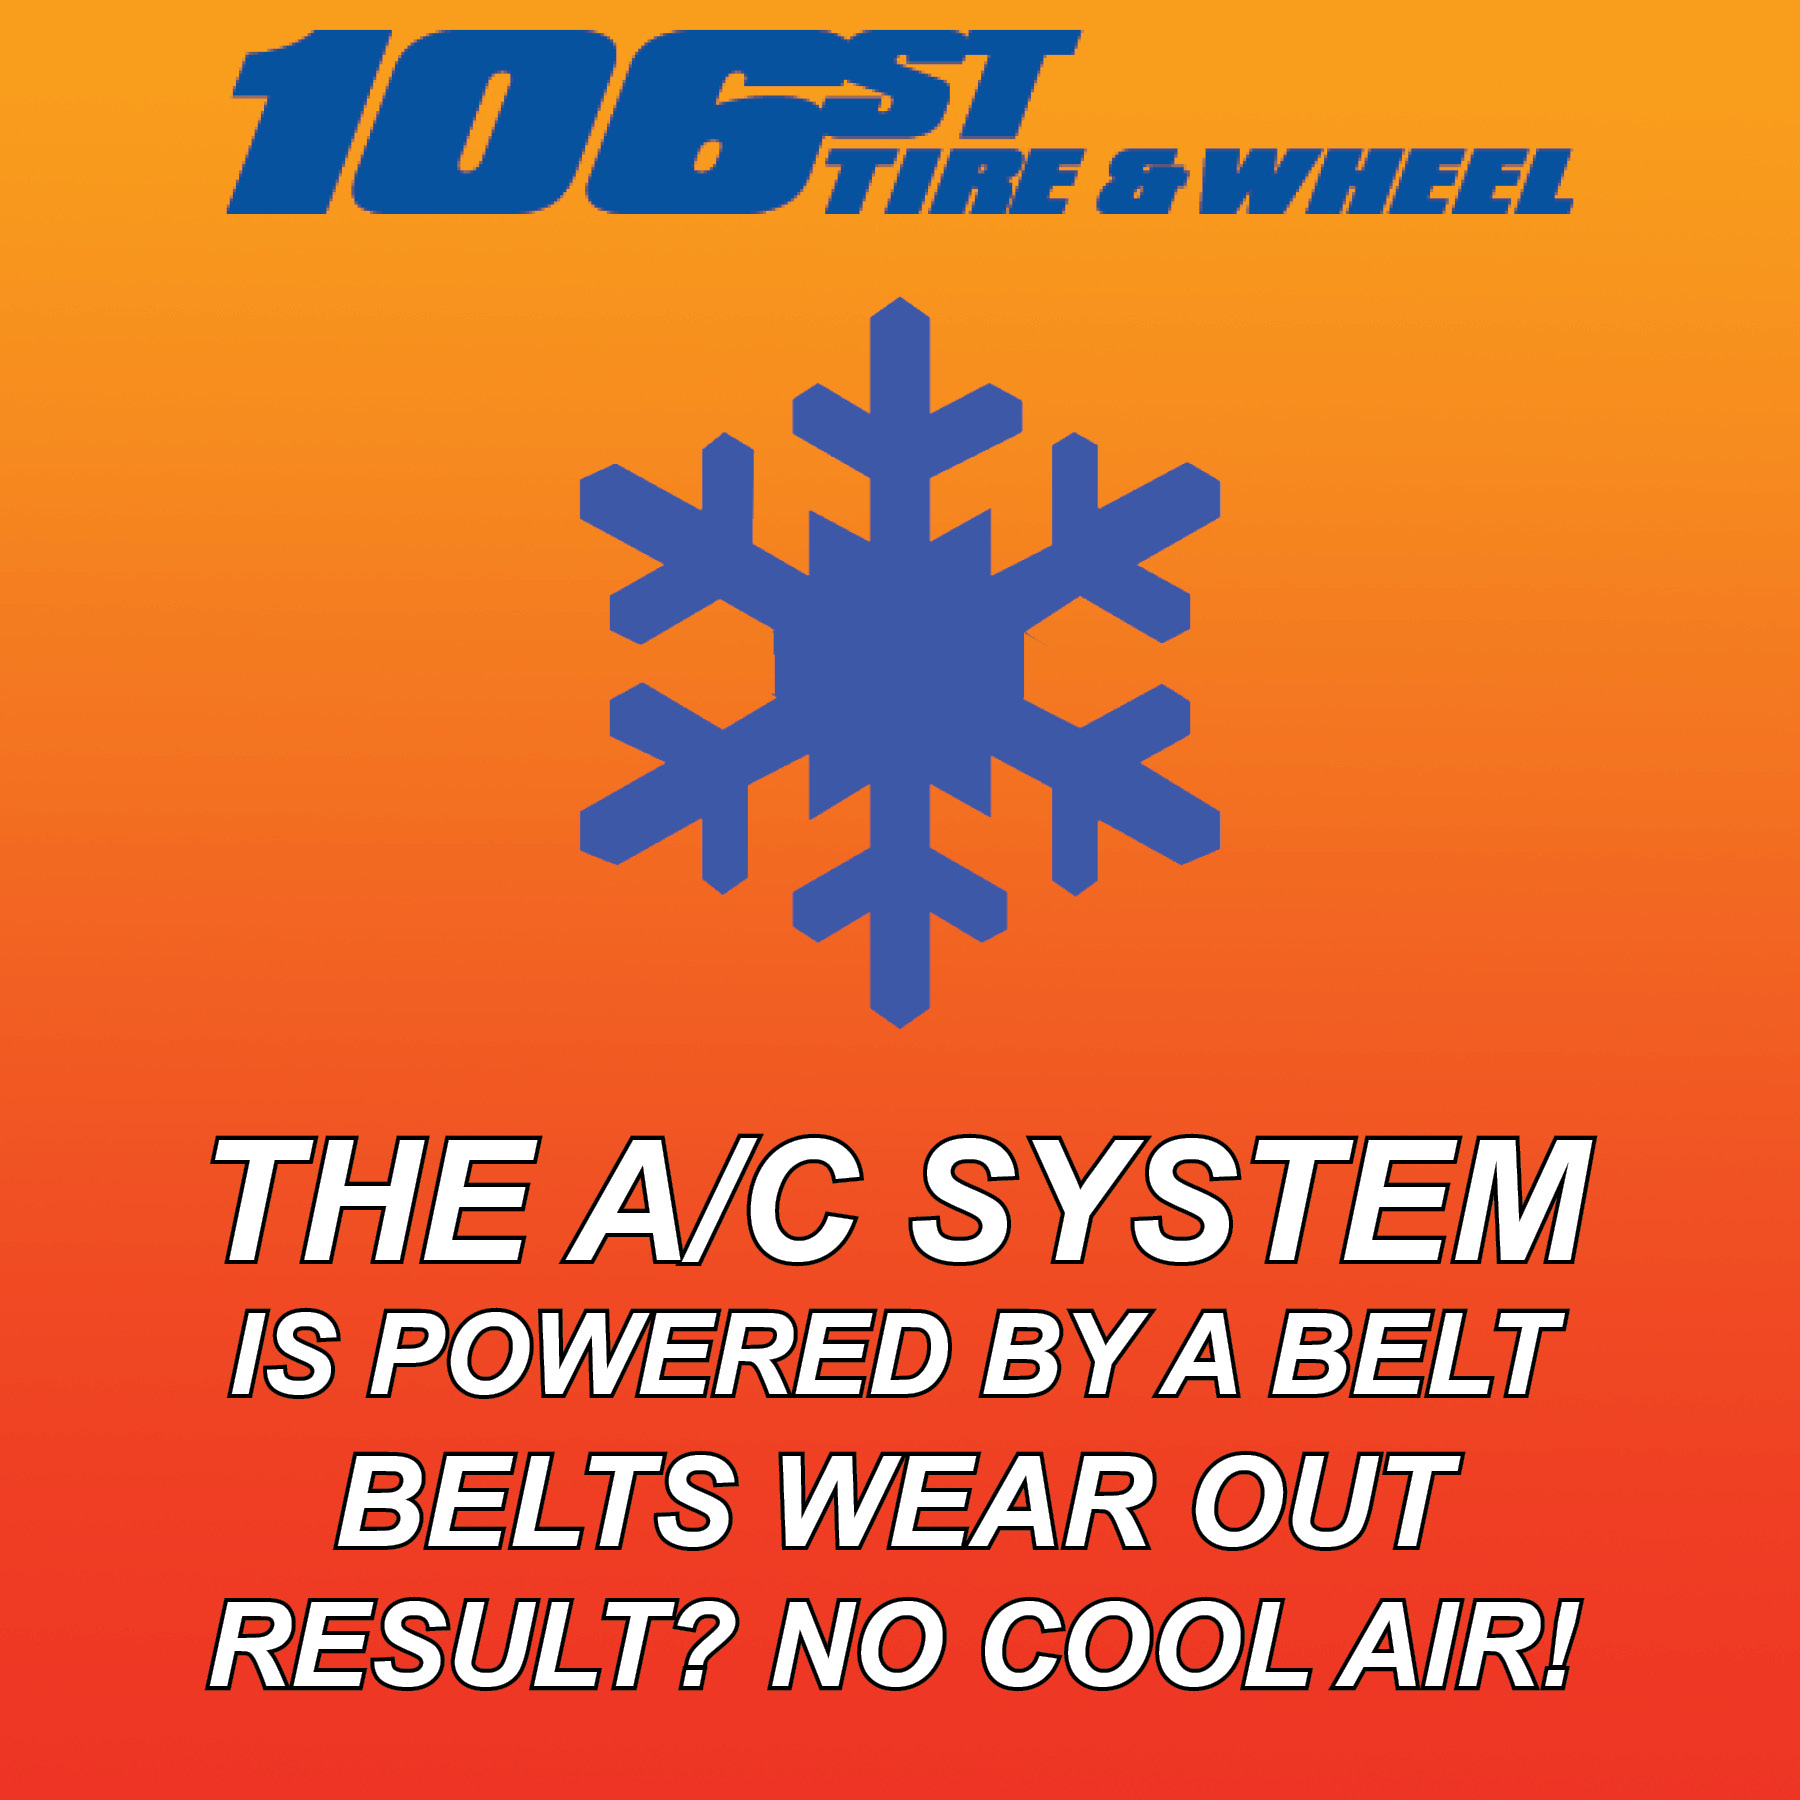 Your car’s air conditioning demystified